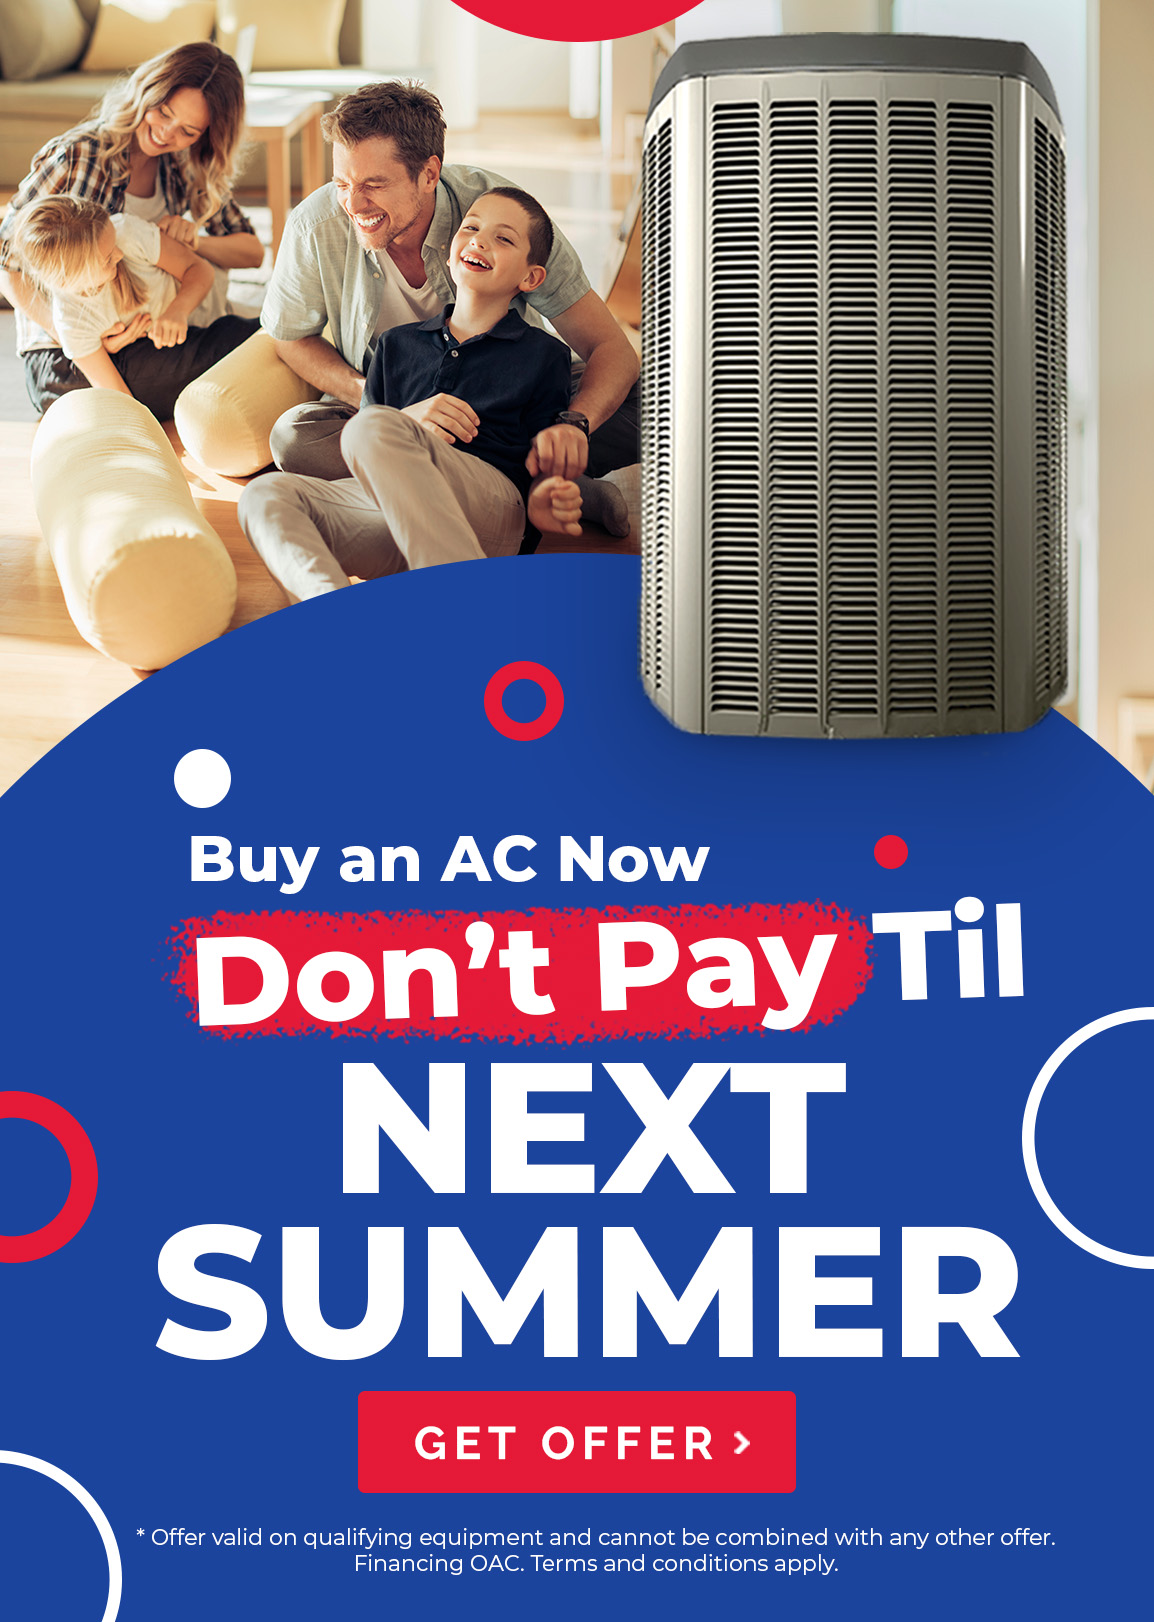 HVAC Services Kingston: Save up to $2500 in savings select systems